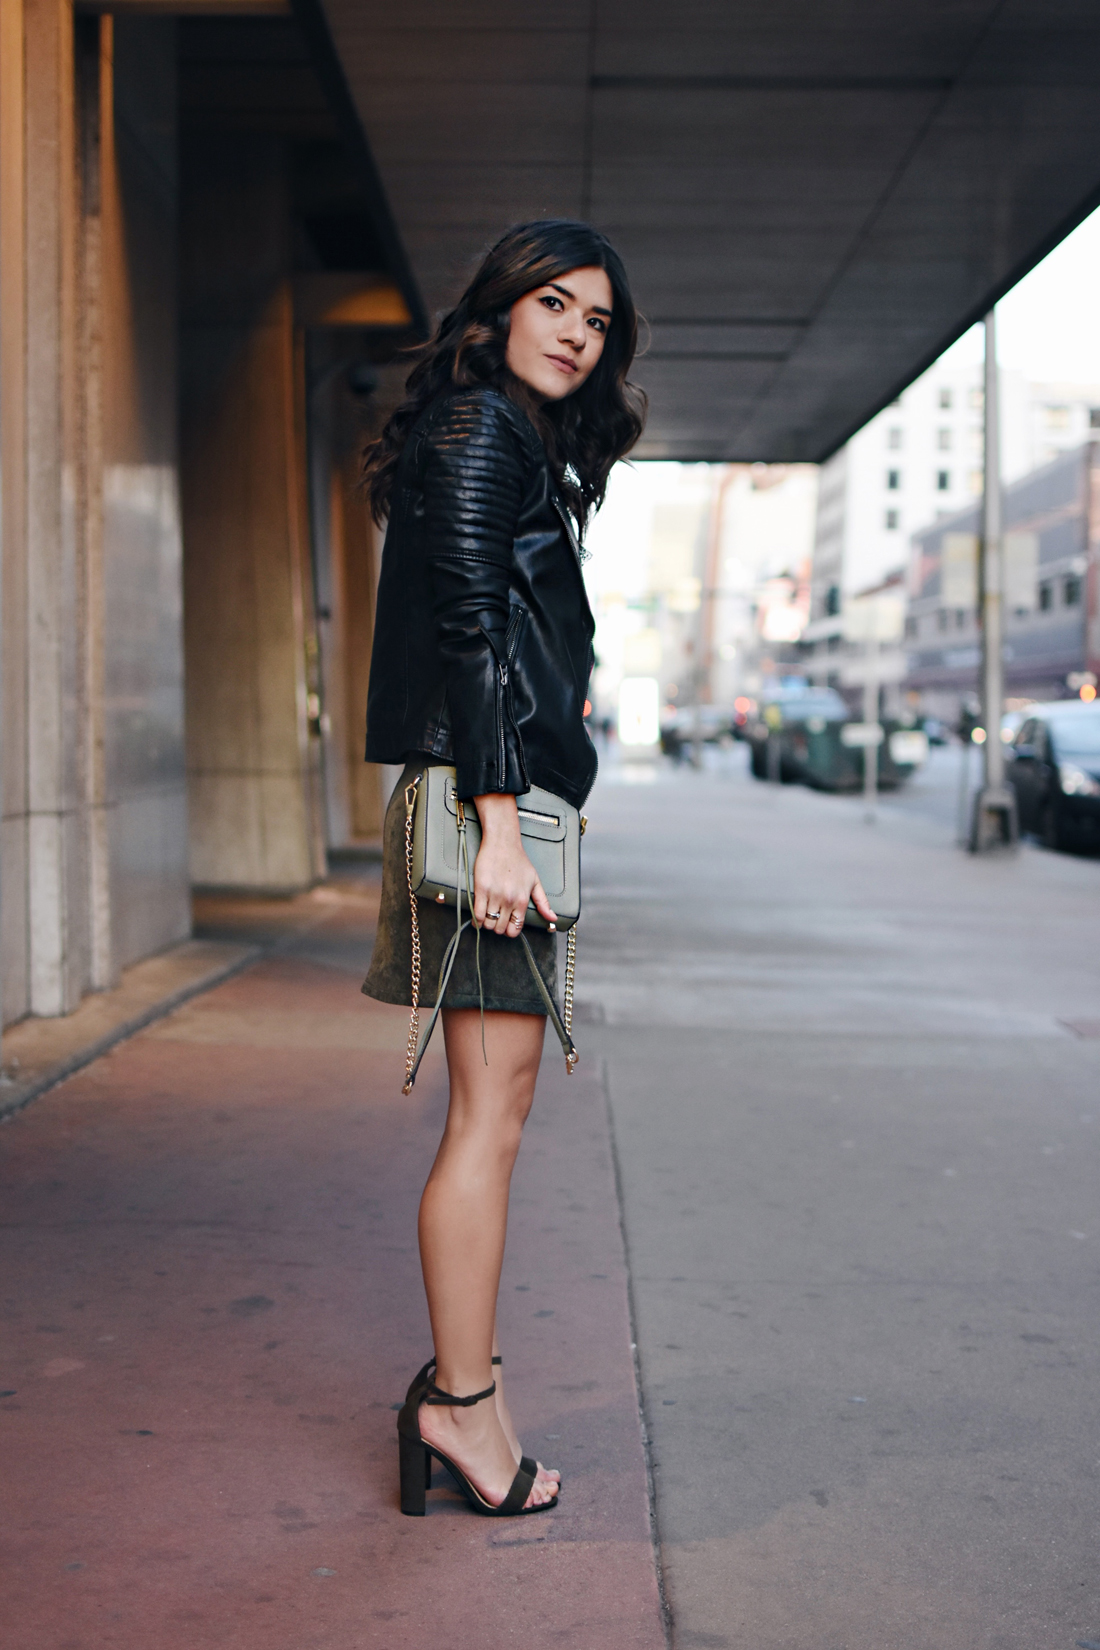 Carolina Hellal of Chictalk wearing a Topshop mesh top and faux leather jacket, Chicwish corduroy skirt, Rebecca Minkoff bag, and strap sandals